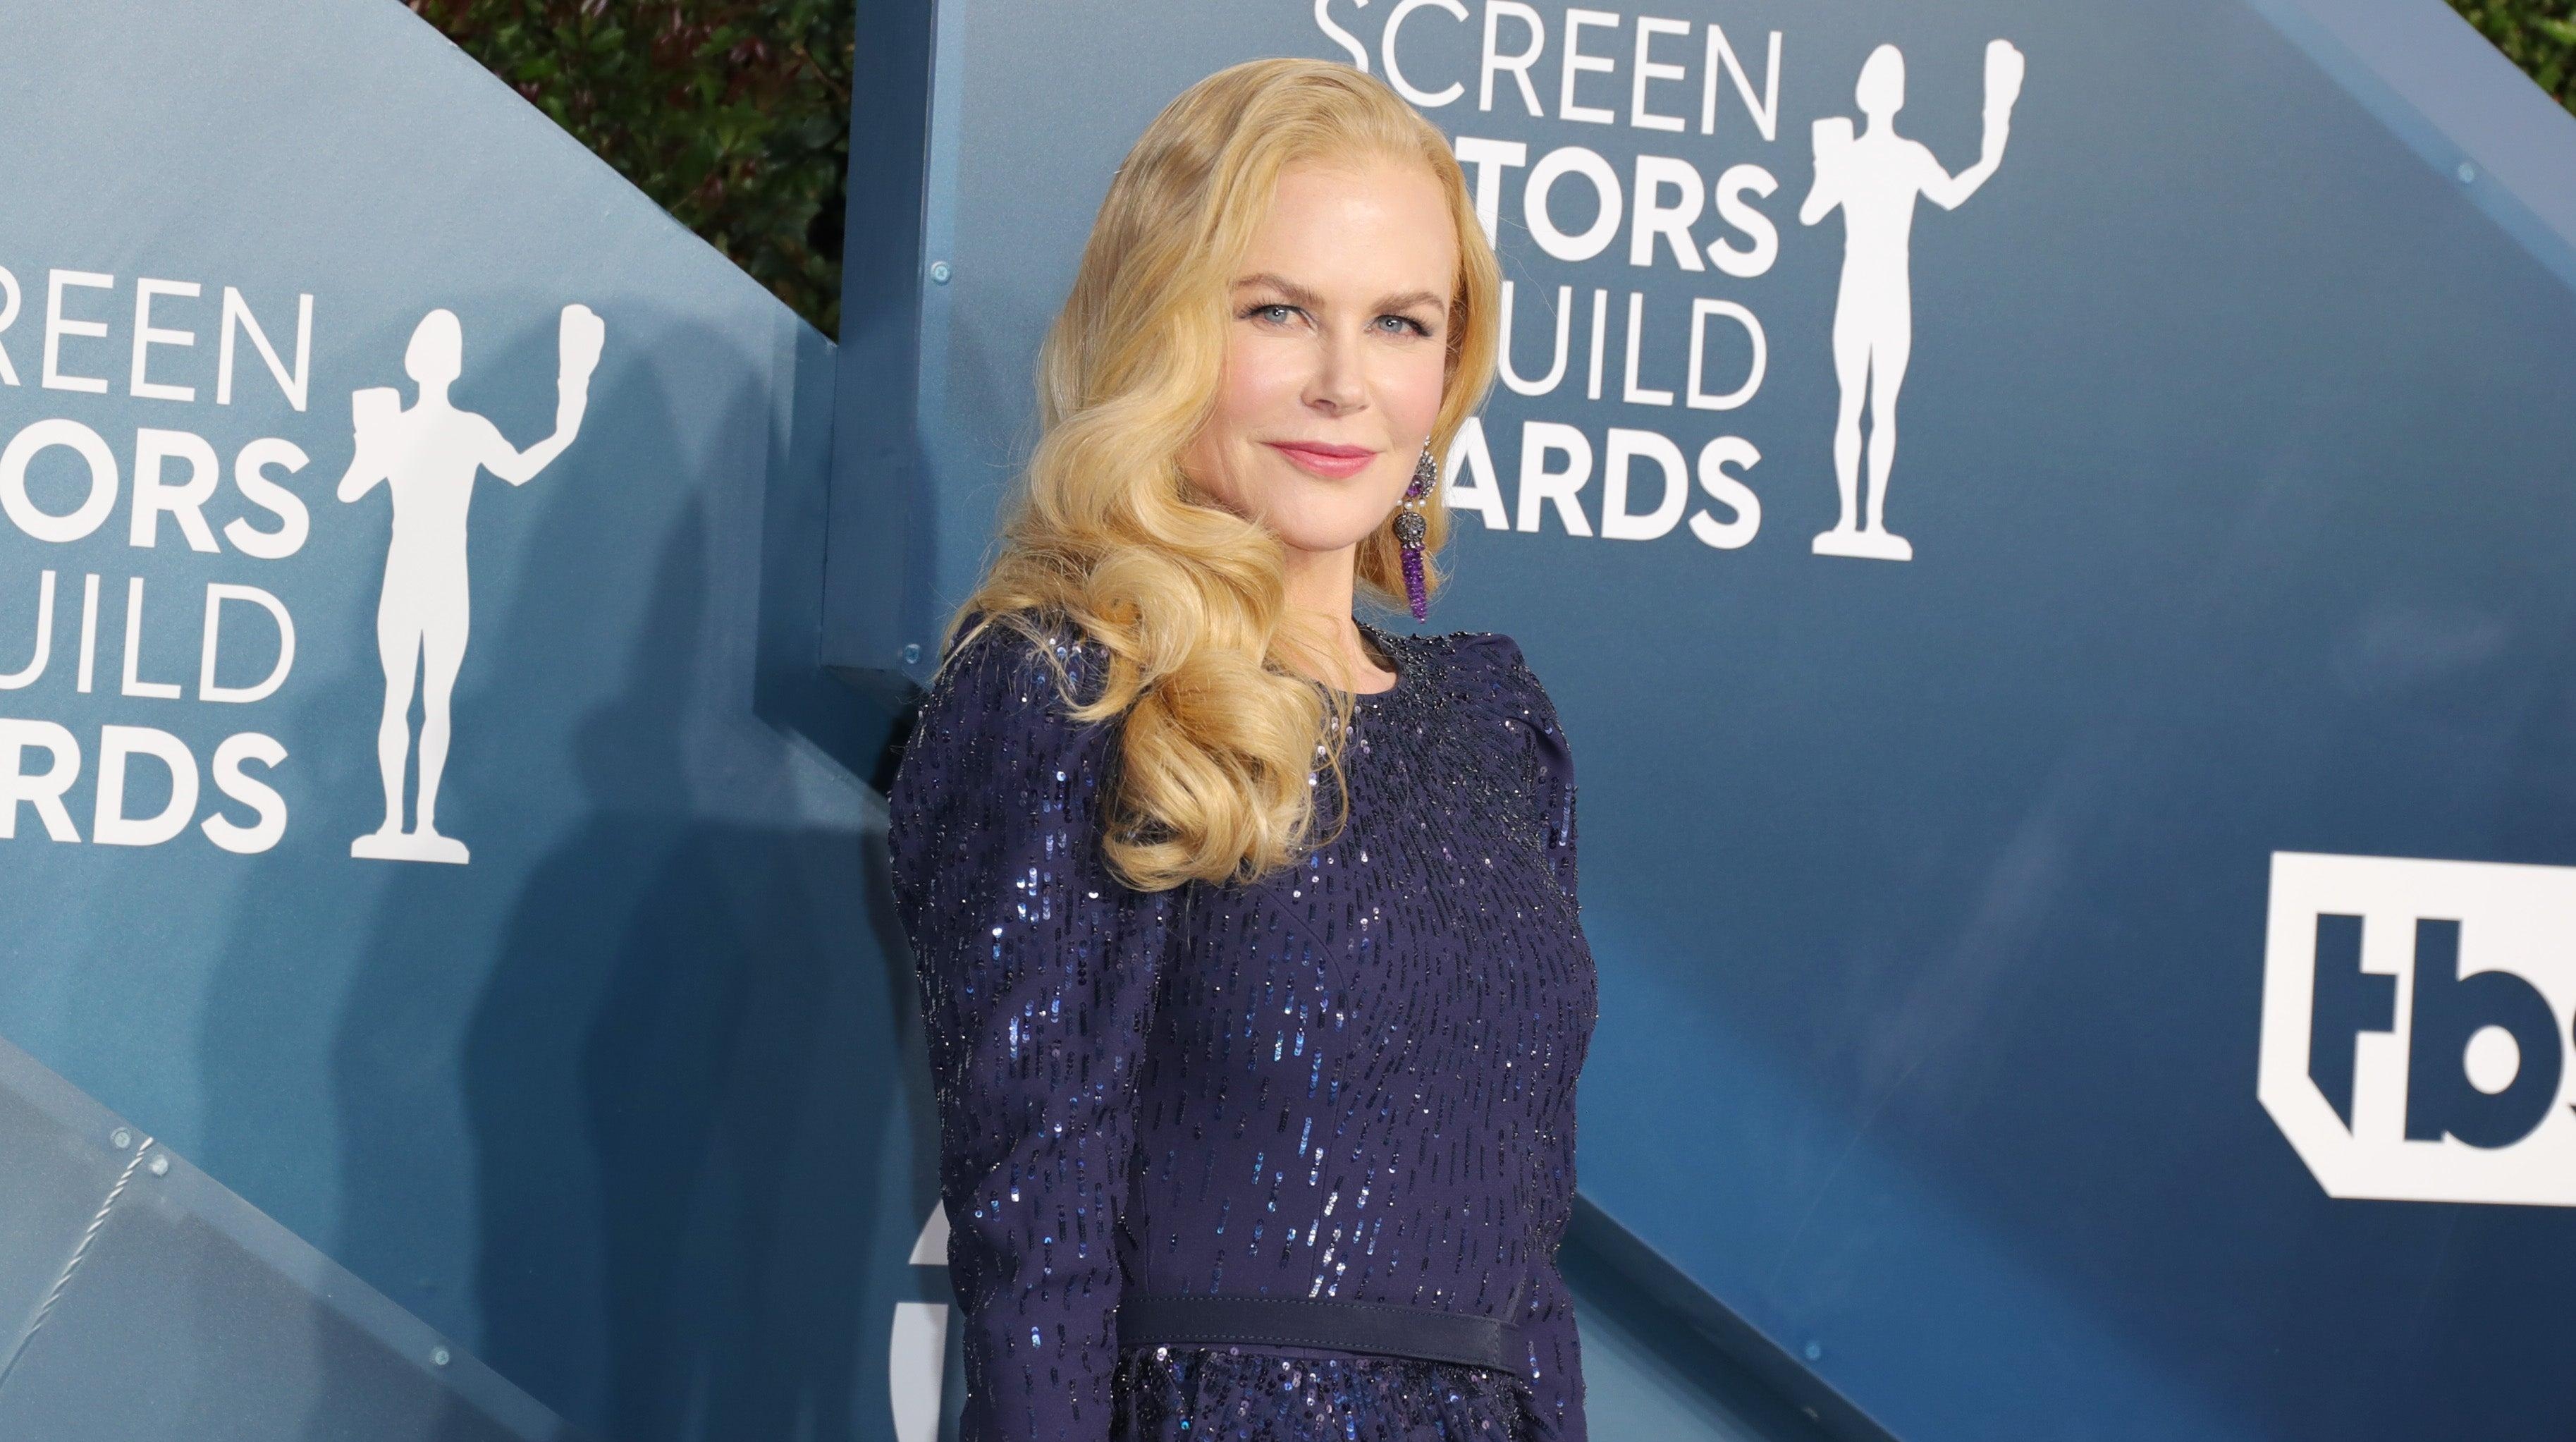 Now it’s Nicole Kidman’s turn to remind Americans about the magic of the movies